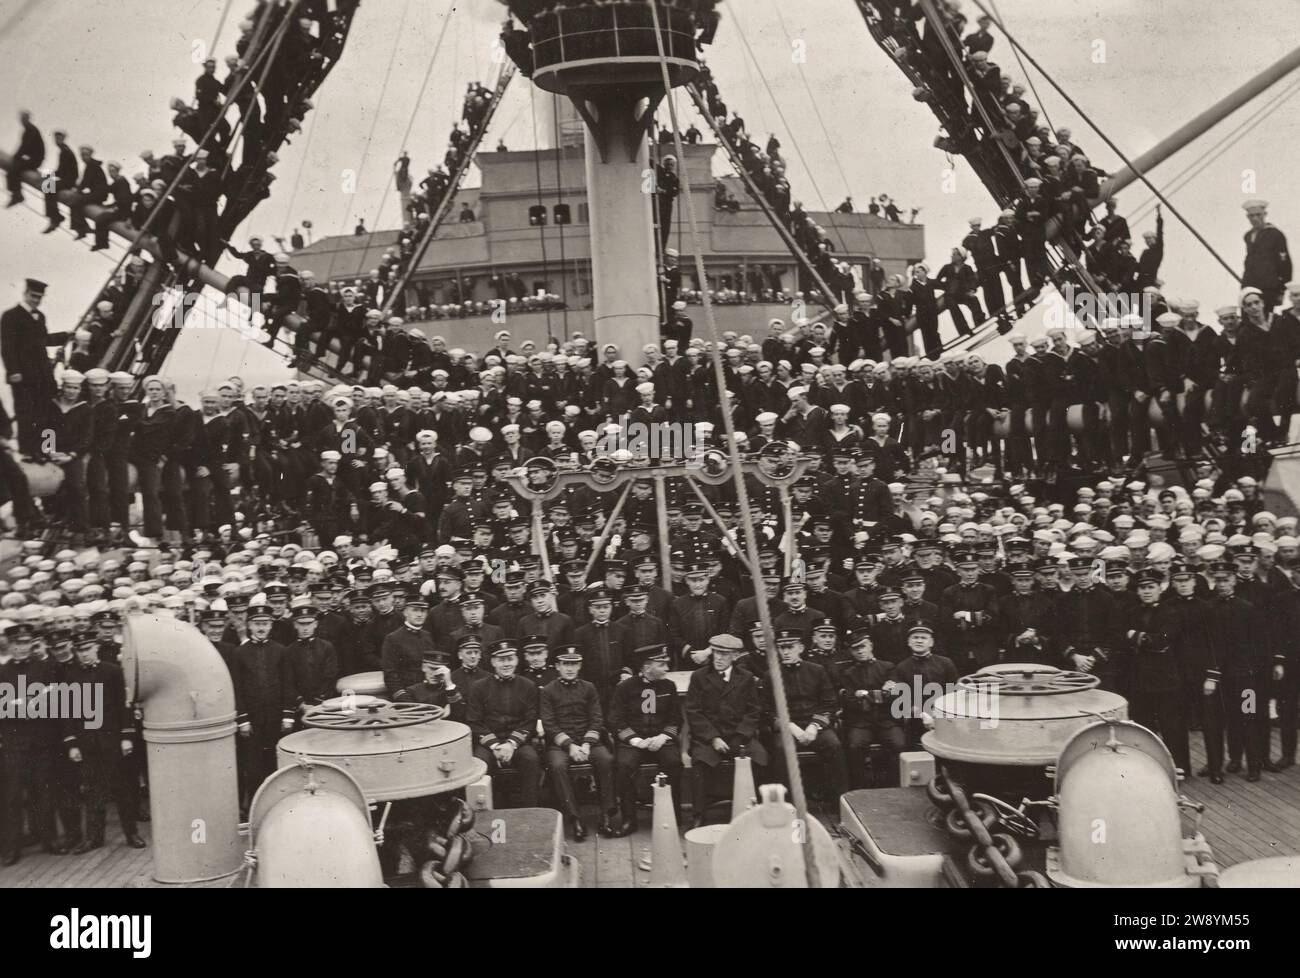 President Woodrow Wilson and members of the U.S.S. George Washington en route to Peace conference, Paris, France 1918 Stock Photo